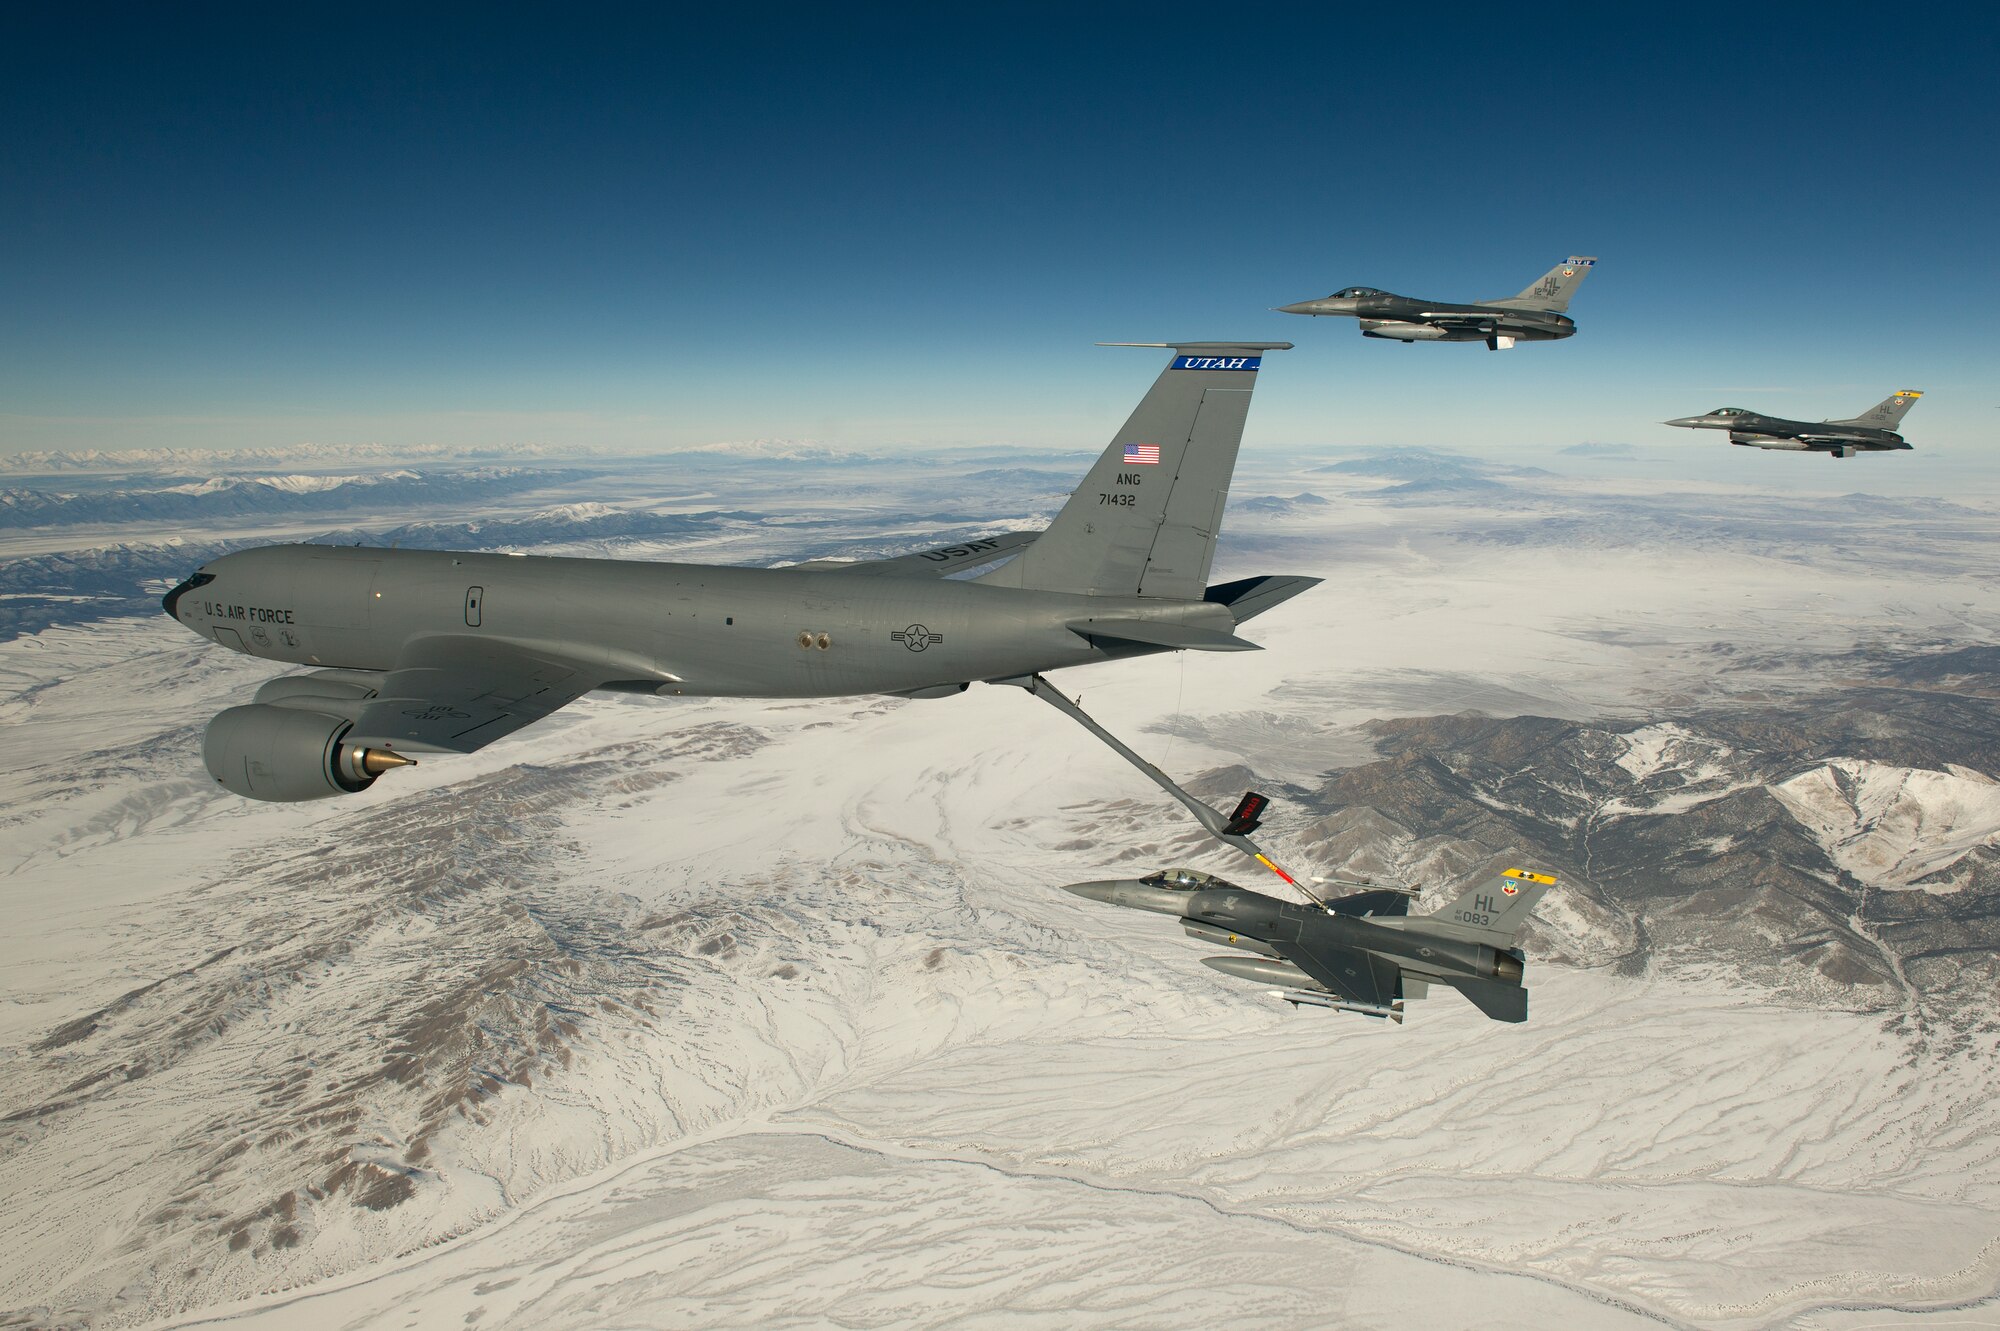 Capt. Jared White, an F-16 Fighting Falcon pilot from the 421st Fighter Squadron, Hill Air Force Base, Utah, maneuvers into position to receive fuel from a Utah National Guard KC-135 tanker en route to San Diego, Calif., Jan. 18, 2013. A cadre of Hill-based 388th Fighter Wing pilots will be operating out of Marine Corps Air Station Miramar to provide close air support for the U.S Marine Corps Integrated Training Exercise (ITX) 13-1 formerly known as Mojave Viper. This joint training operation, executed at 29 Palms, prepares Marine battalions for deployment to Afghanistan. (USAF Photo by Master Sgt. Ben Bloker)